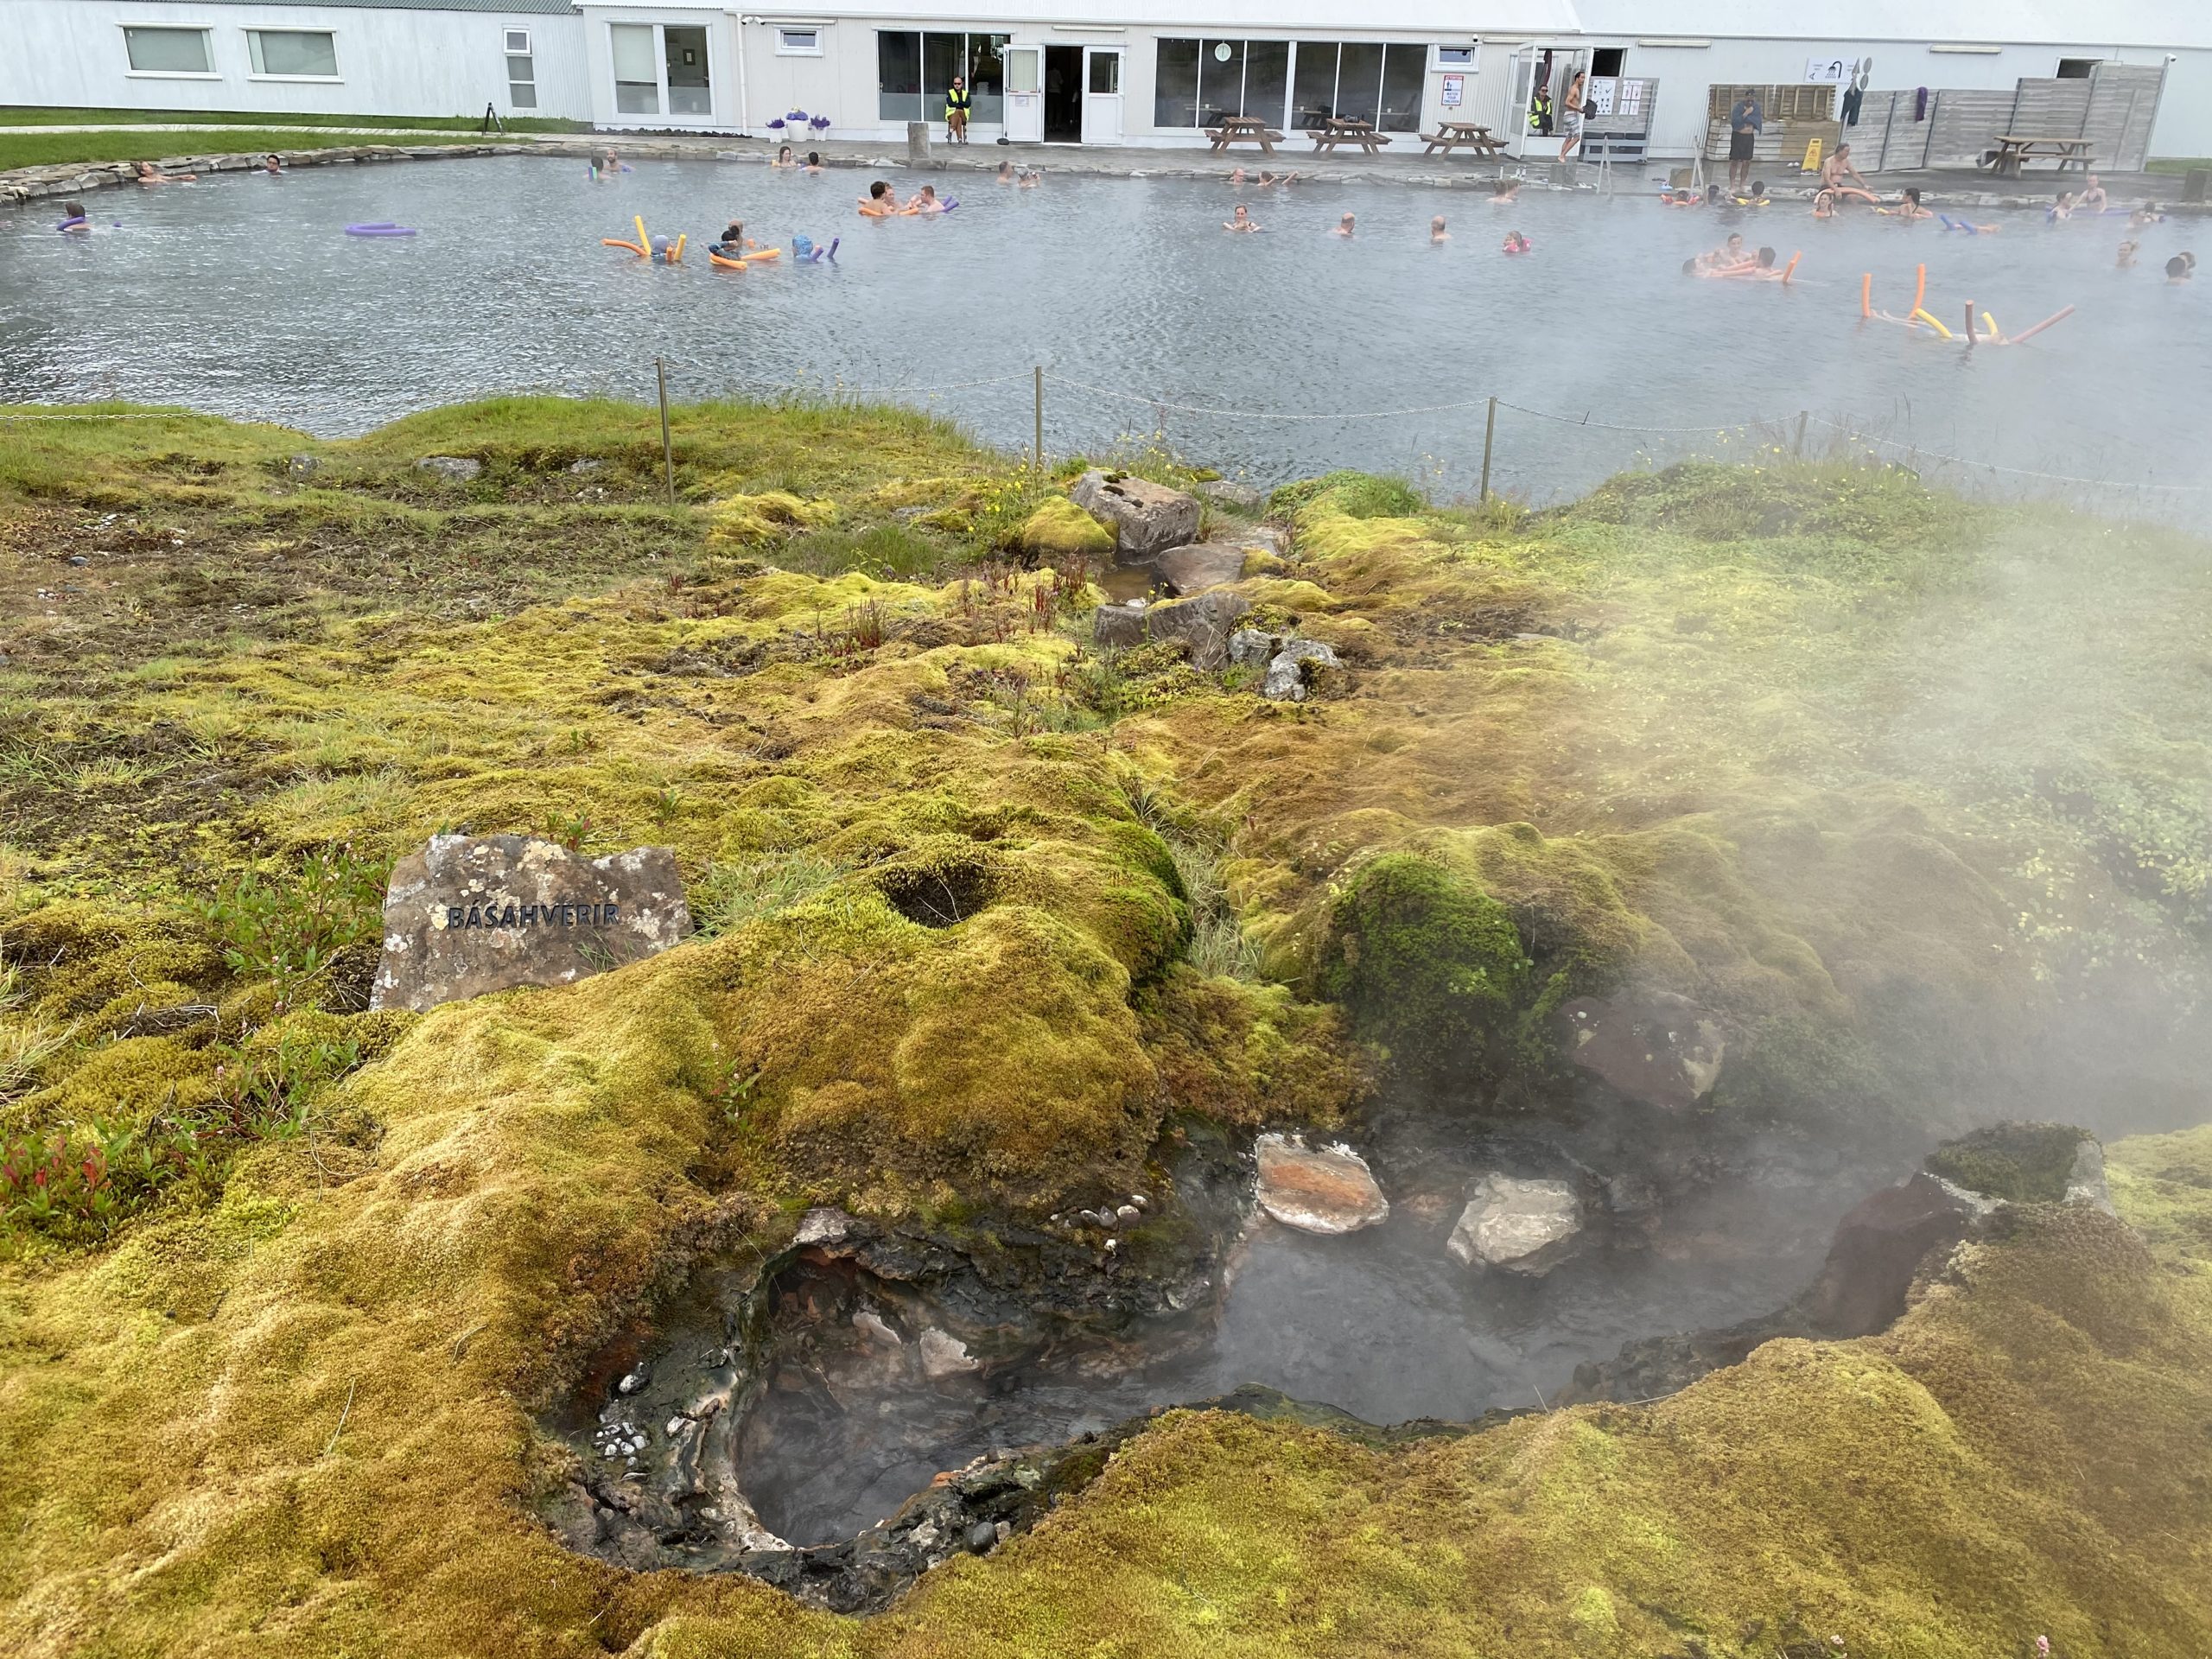 a pool with hot springs and people swimming in it